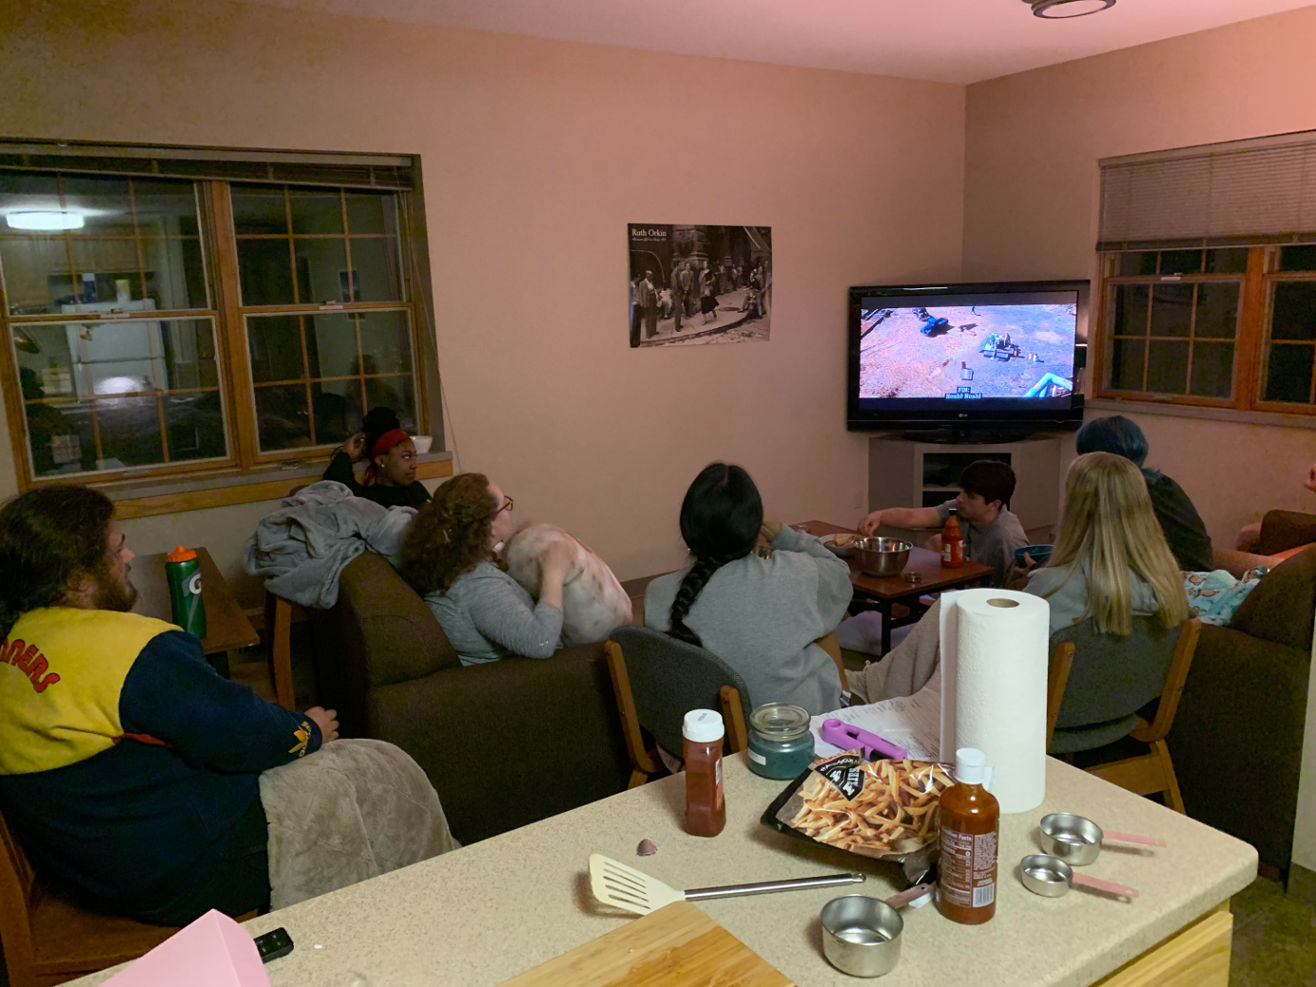 This image depicts some of the 2022 summer BSTI students having a spontaneous watch party of the Notebook one evening after a day of research!